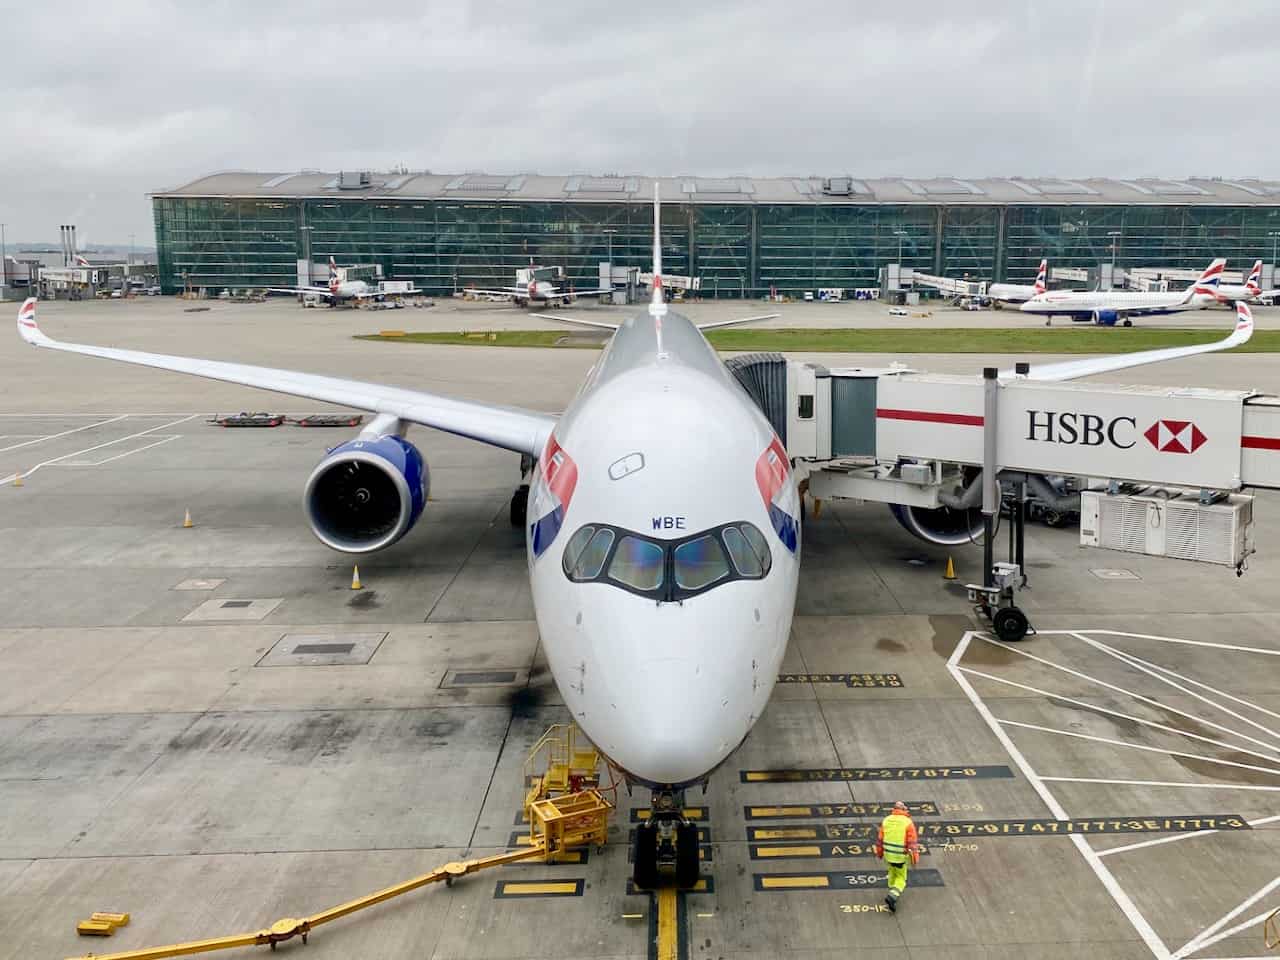 Things to do on a long layover at London Heathrow Airport